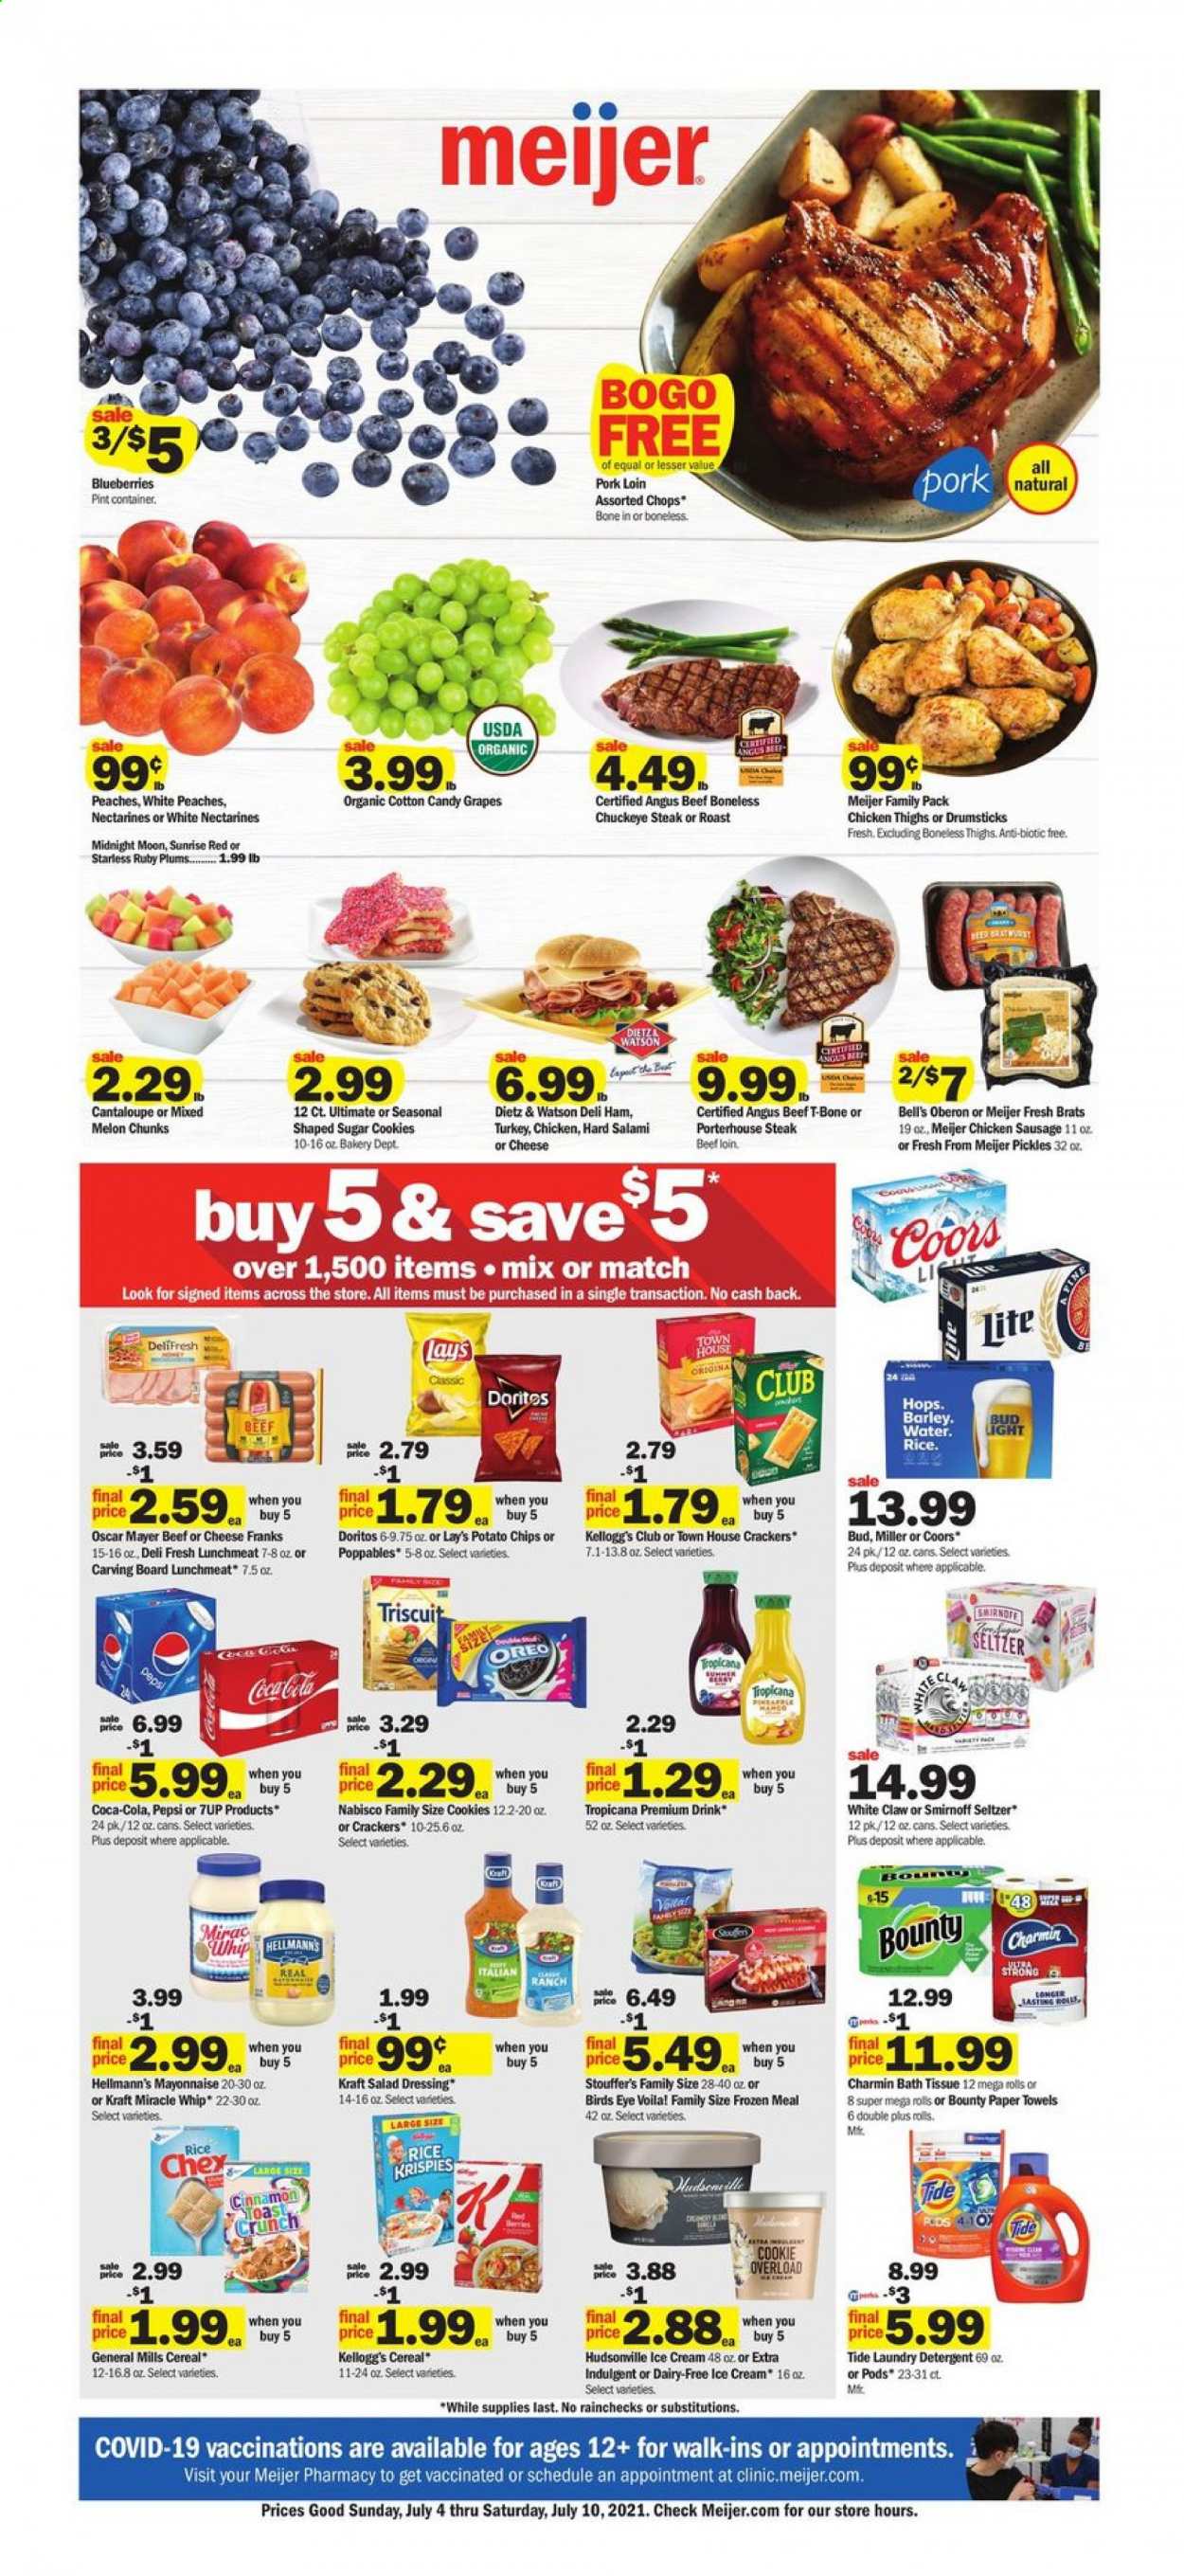 thumbnail - Meijer Flyer - 07/04/2021 - 07/10/2021 - Sales products - plums, cantaloupe, blueberries, grapes, Bird's Eye, Kraft®, salami, ham, Oscar Mayer, Dietz & Watson, sausage, chicken sausage, lunch meat, Oreo, mayonnaise, Miracle Whip, Hellmann’s, ice cream, Stouffer's, cookies, Bounty, cotton candy, crackers, Kellogg's, Doritos, potato chips, Lay’s, pickles, cereals, Rice Krispies, cinnamon, salad dressing, dressing, Coca-Cola, Pepsi, 7UP, Smirnoff, White Claw, Hard Seltzer, beer, Coors, Bud Light, Miller, chicken thighs, beef meat, t-bone steak, steak, chuck steak, pork loin, pork meat, bath tissue, kitchen towels, paper towels, Charmin, detergent, Tide, laundry detergent, nectarines, melons, peaches. Page 1.